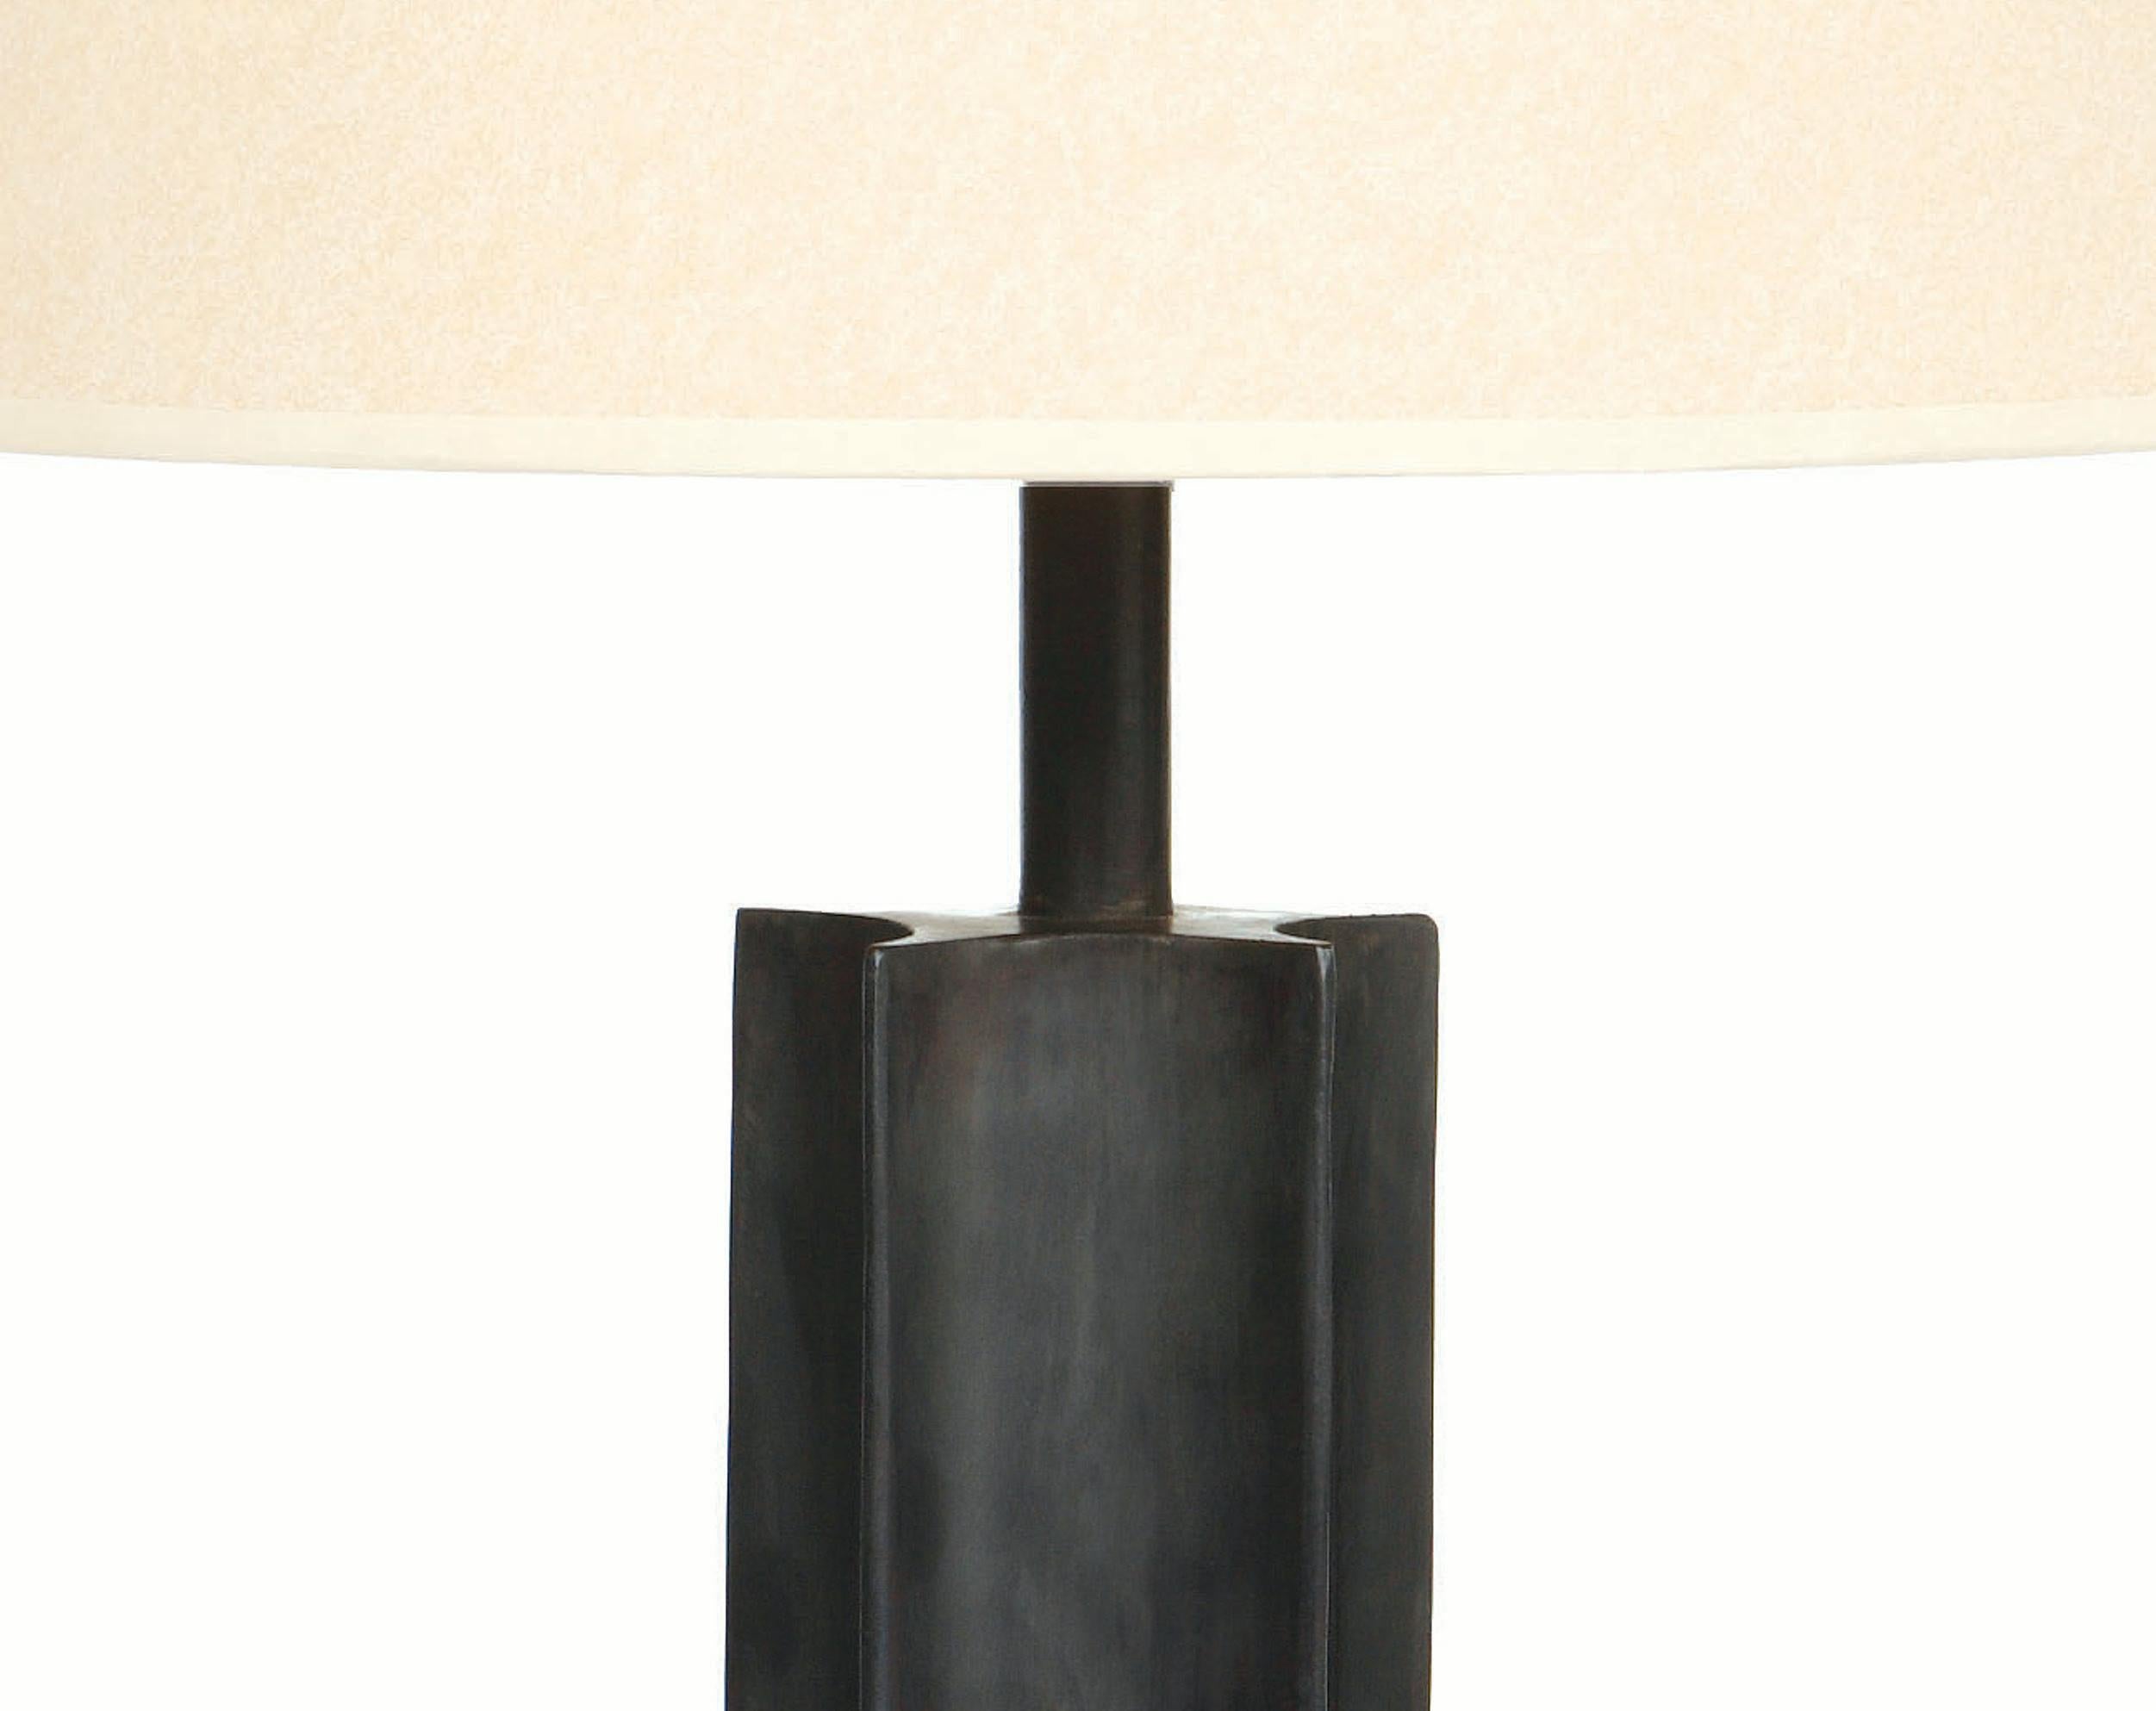 The Star Table Lamp features an oil-rubbed blackened steel base.

The maximum wattage bulb recommended is 100W. The Star Table Lamp is UL listed.

The Star Table Lamp dimensions listed include the dimensions of the included shade. The shade